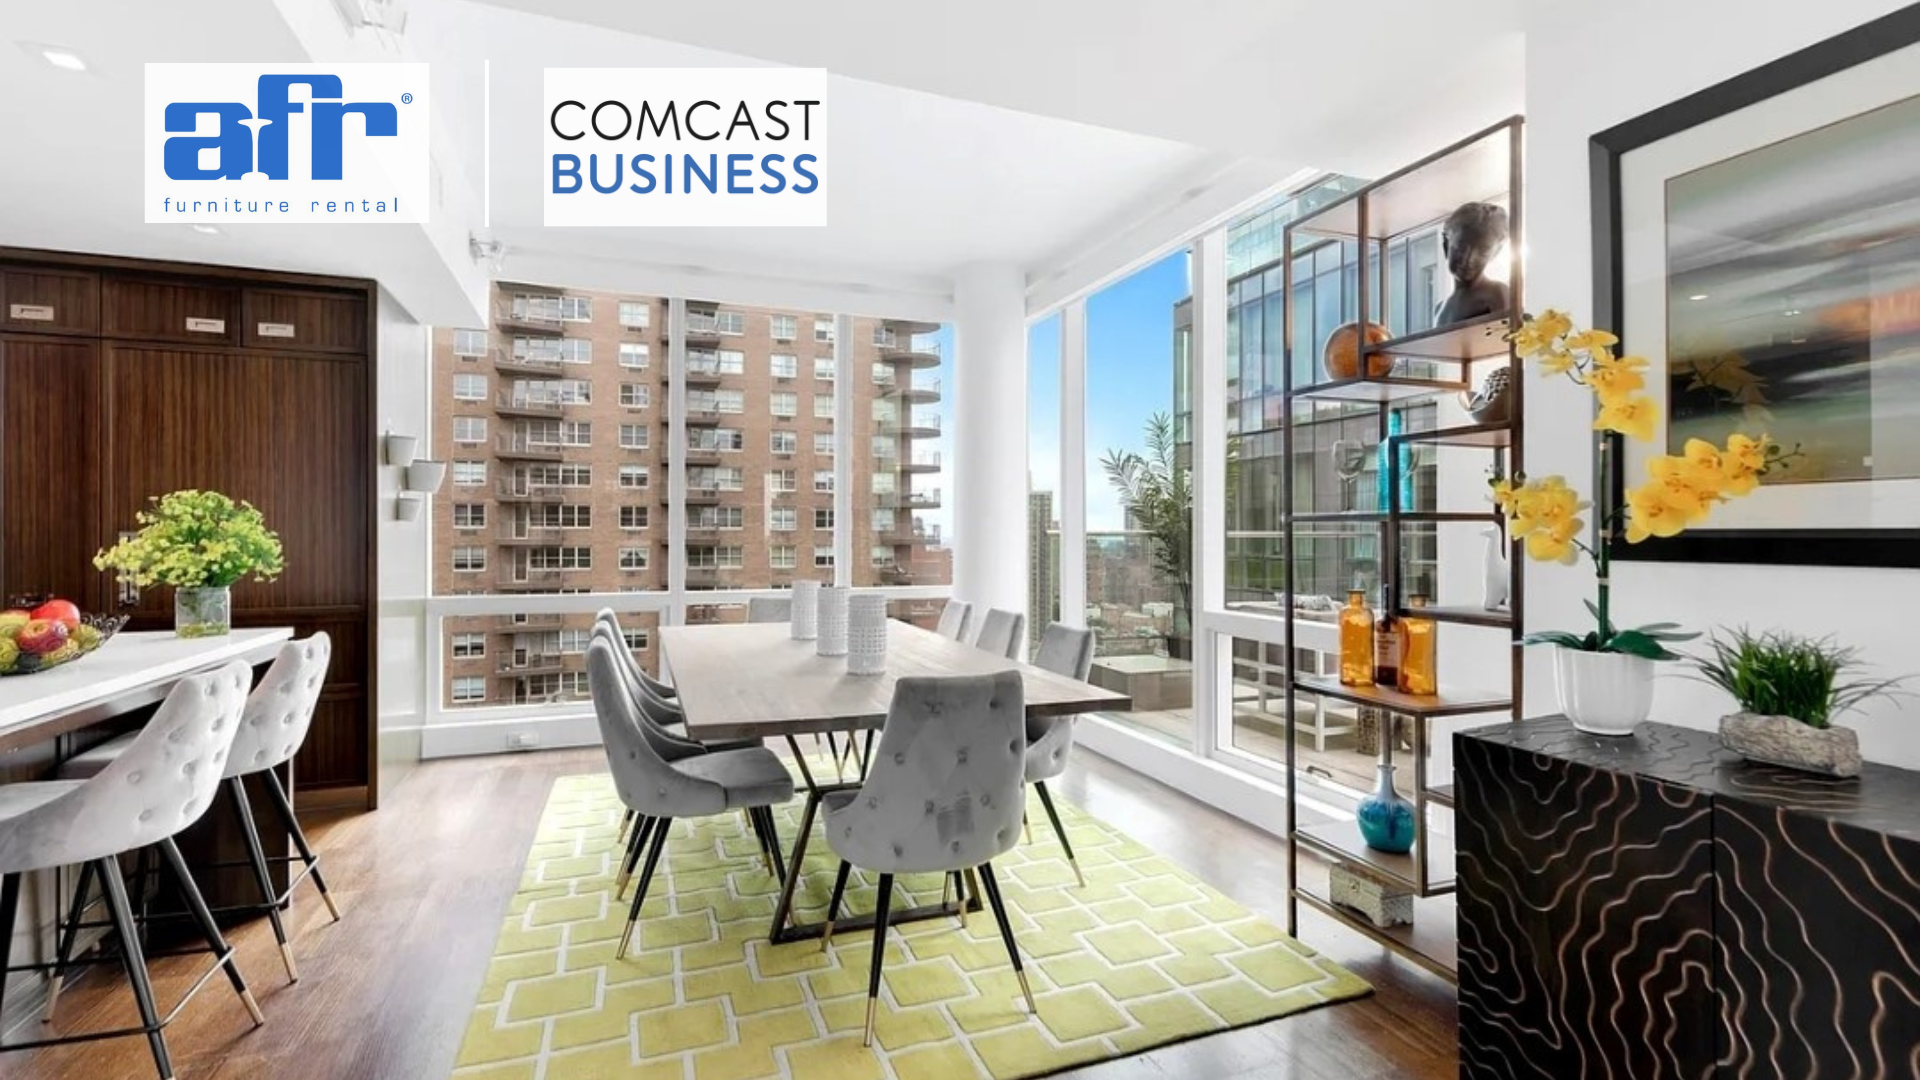 Comcast Business Offers Security Solutions for AFR Furniture Rental